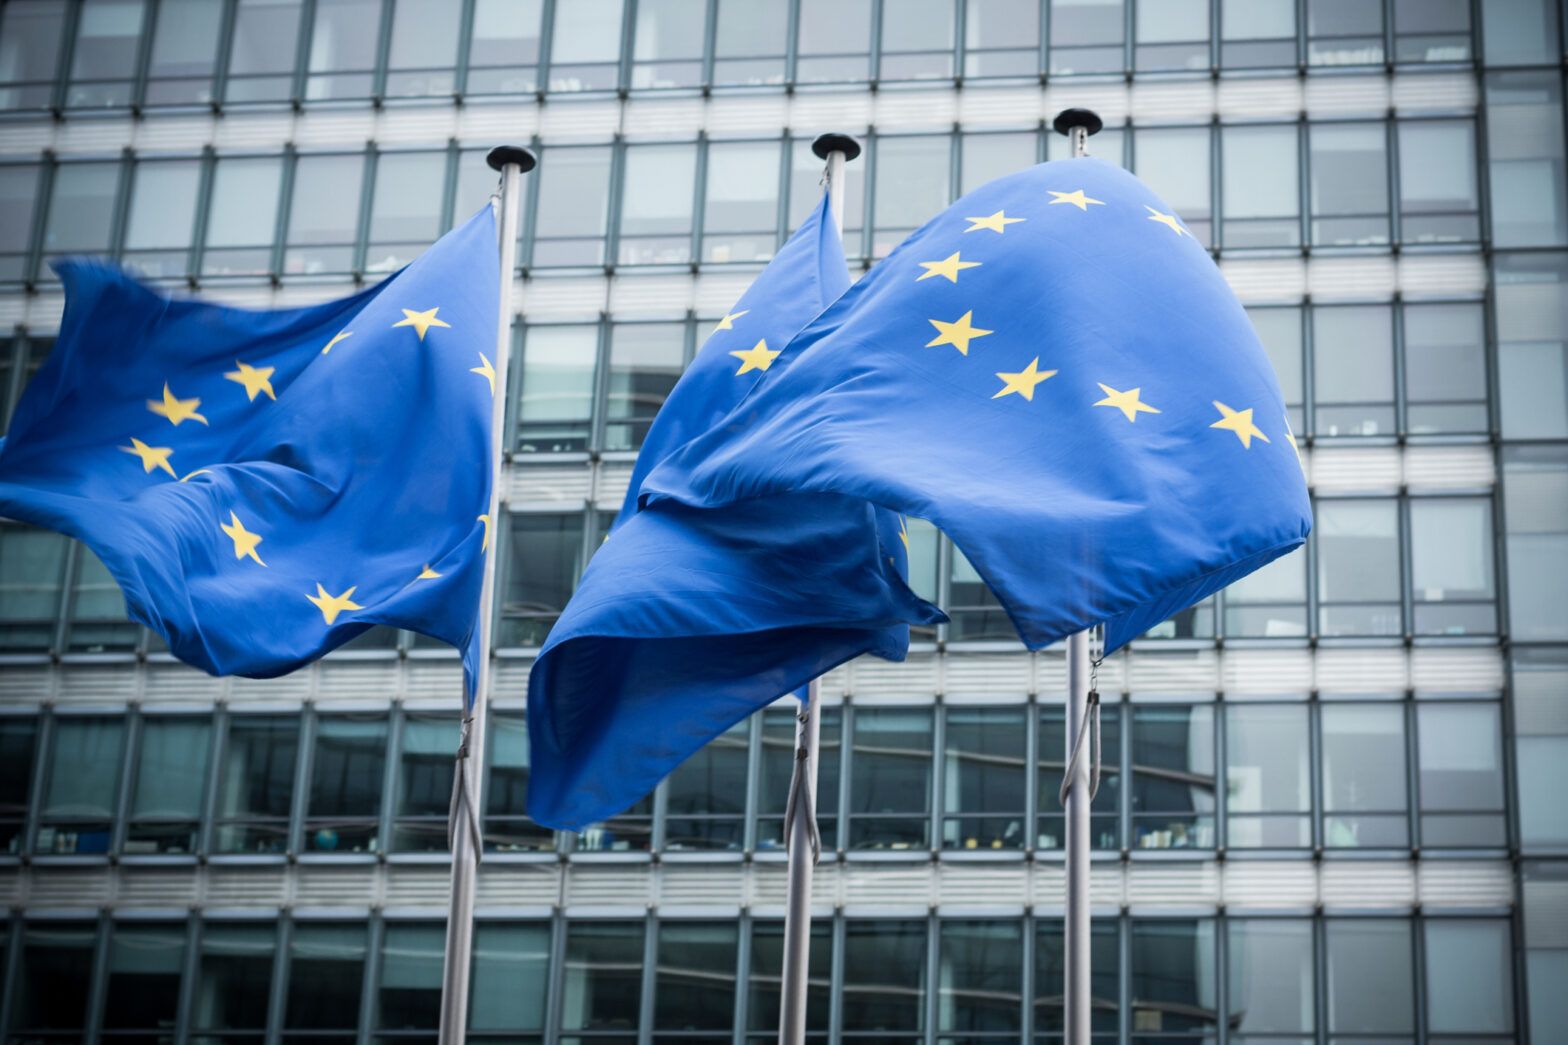 EU introduces disclosure ‘flexibility’ as it adopts sustainability standards